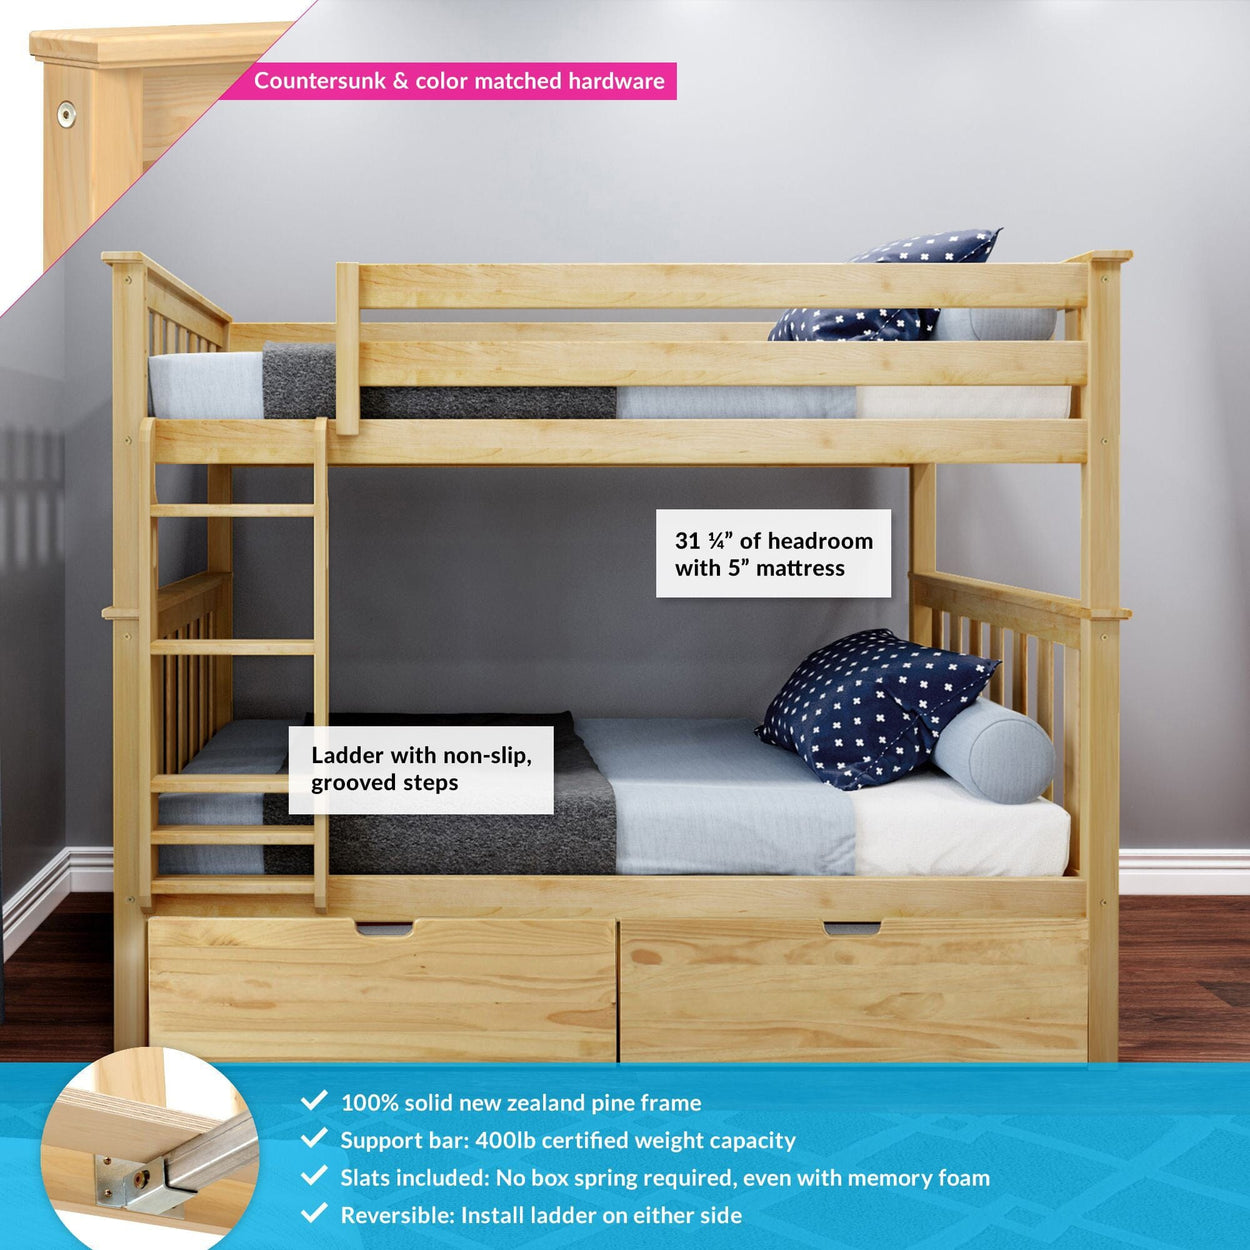 187201-001 : Bunk Beds Twin Bunk Bed With Underbed Storage Drawers, Natural